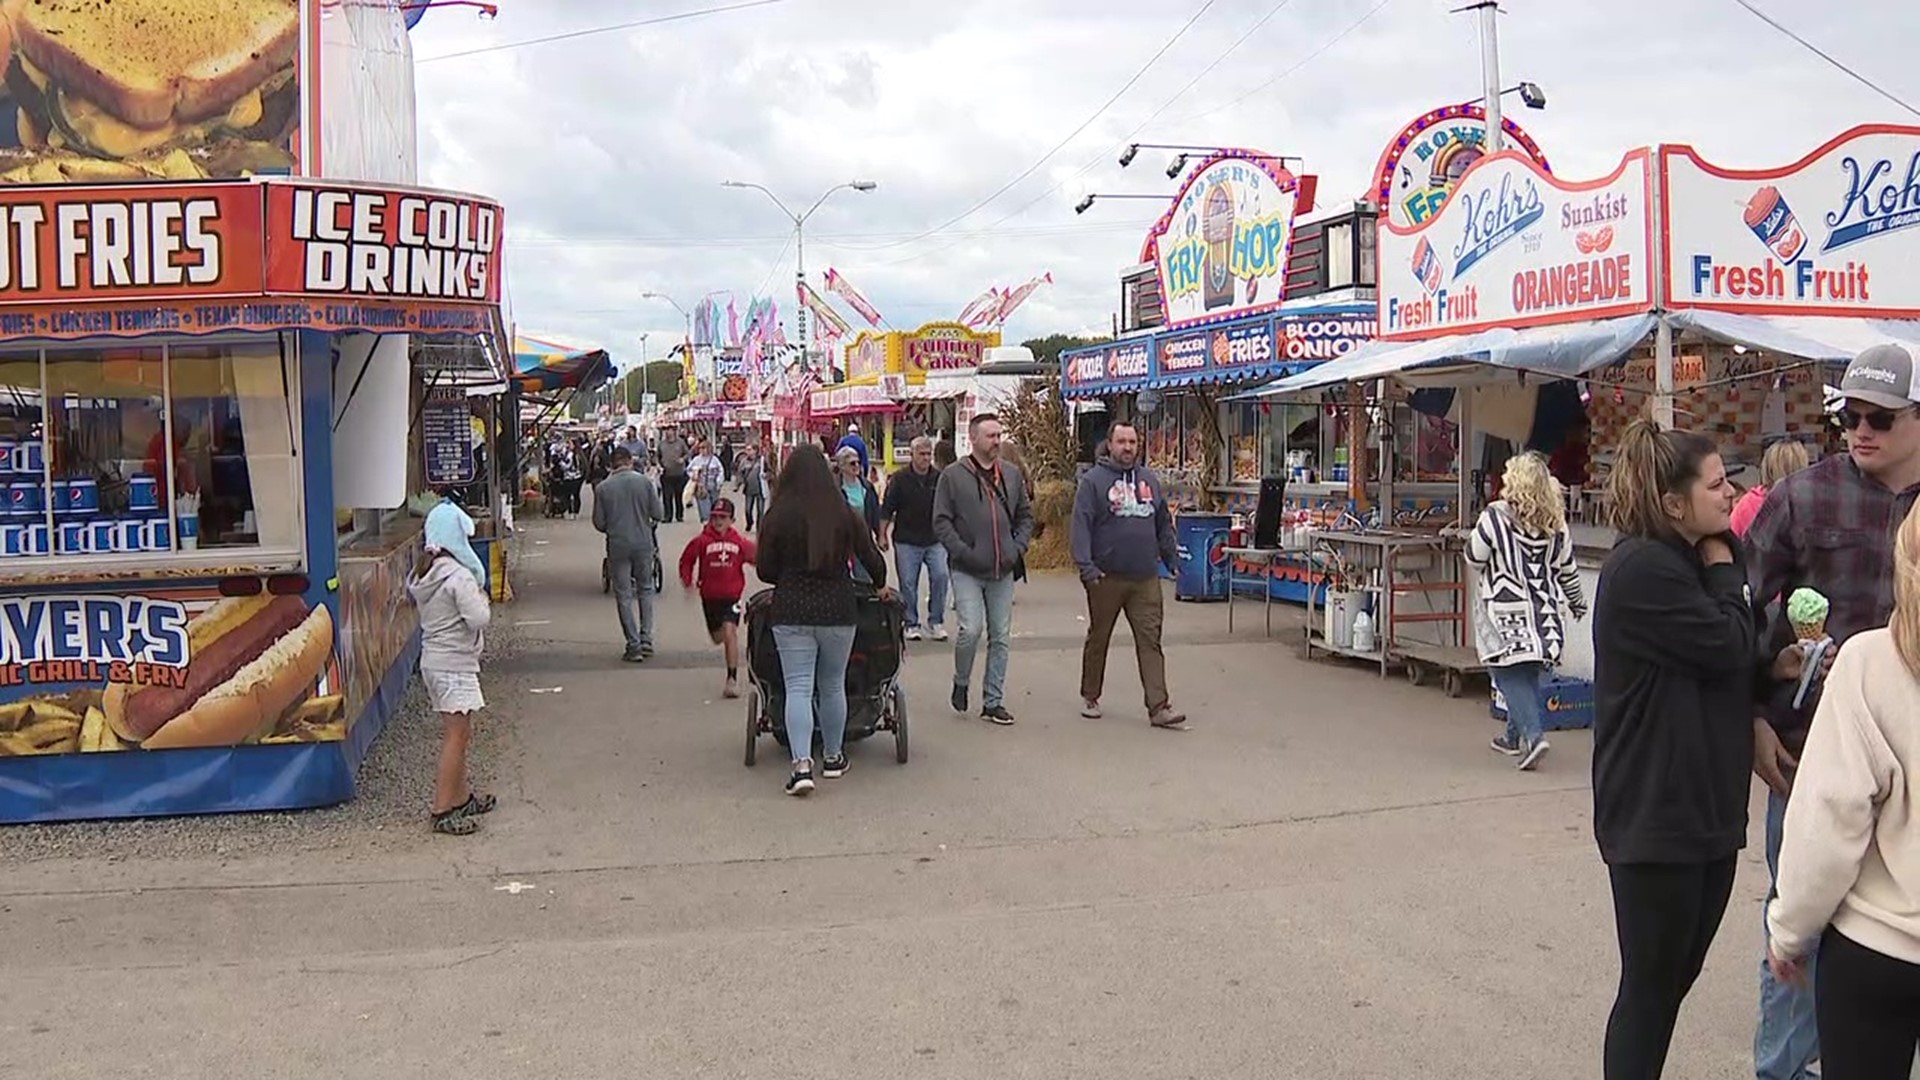 High prices are everywhere, including at Pennsylvania's largest fair.